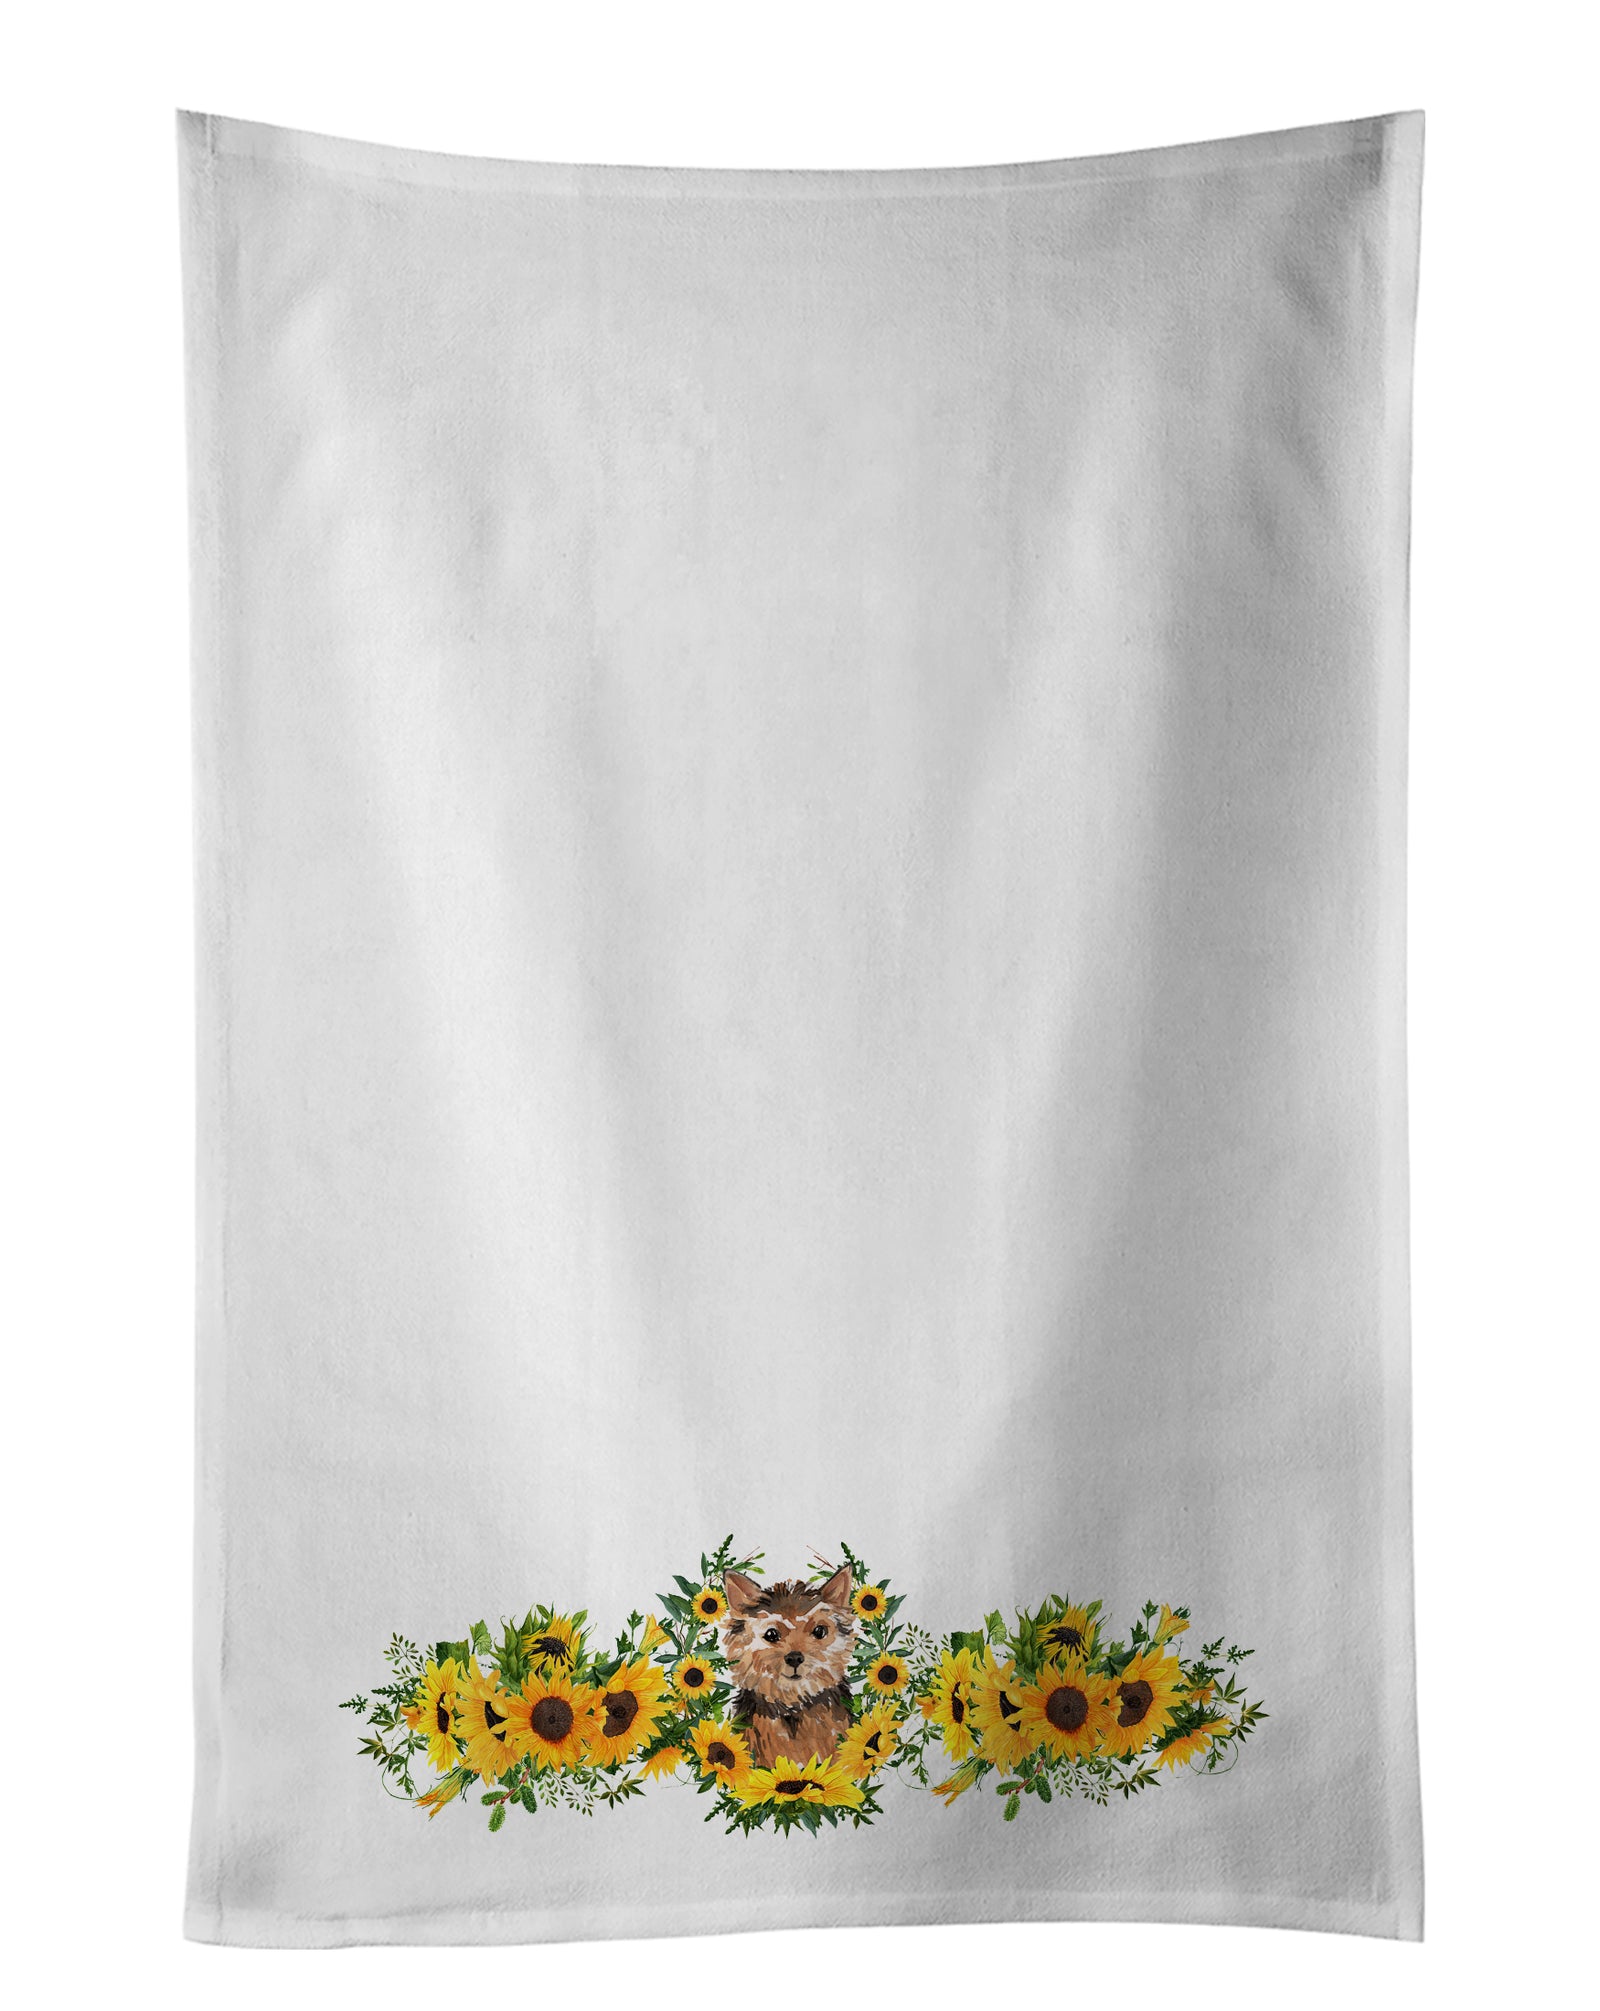 Buy this Norwich Terrier in Sunflowers White Kitchen Towel Set of 2